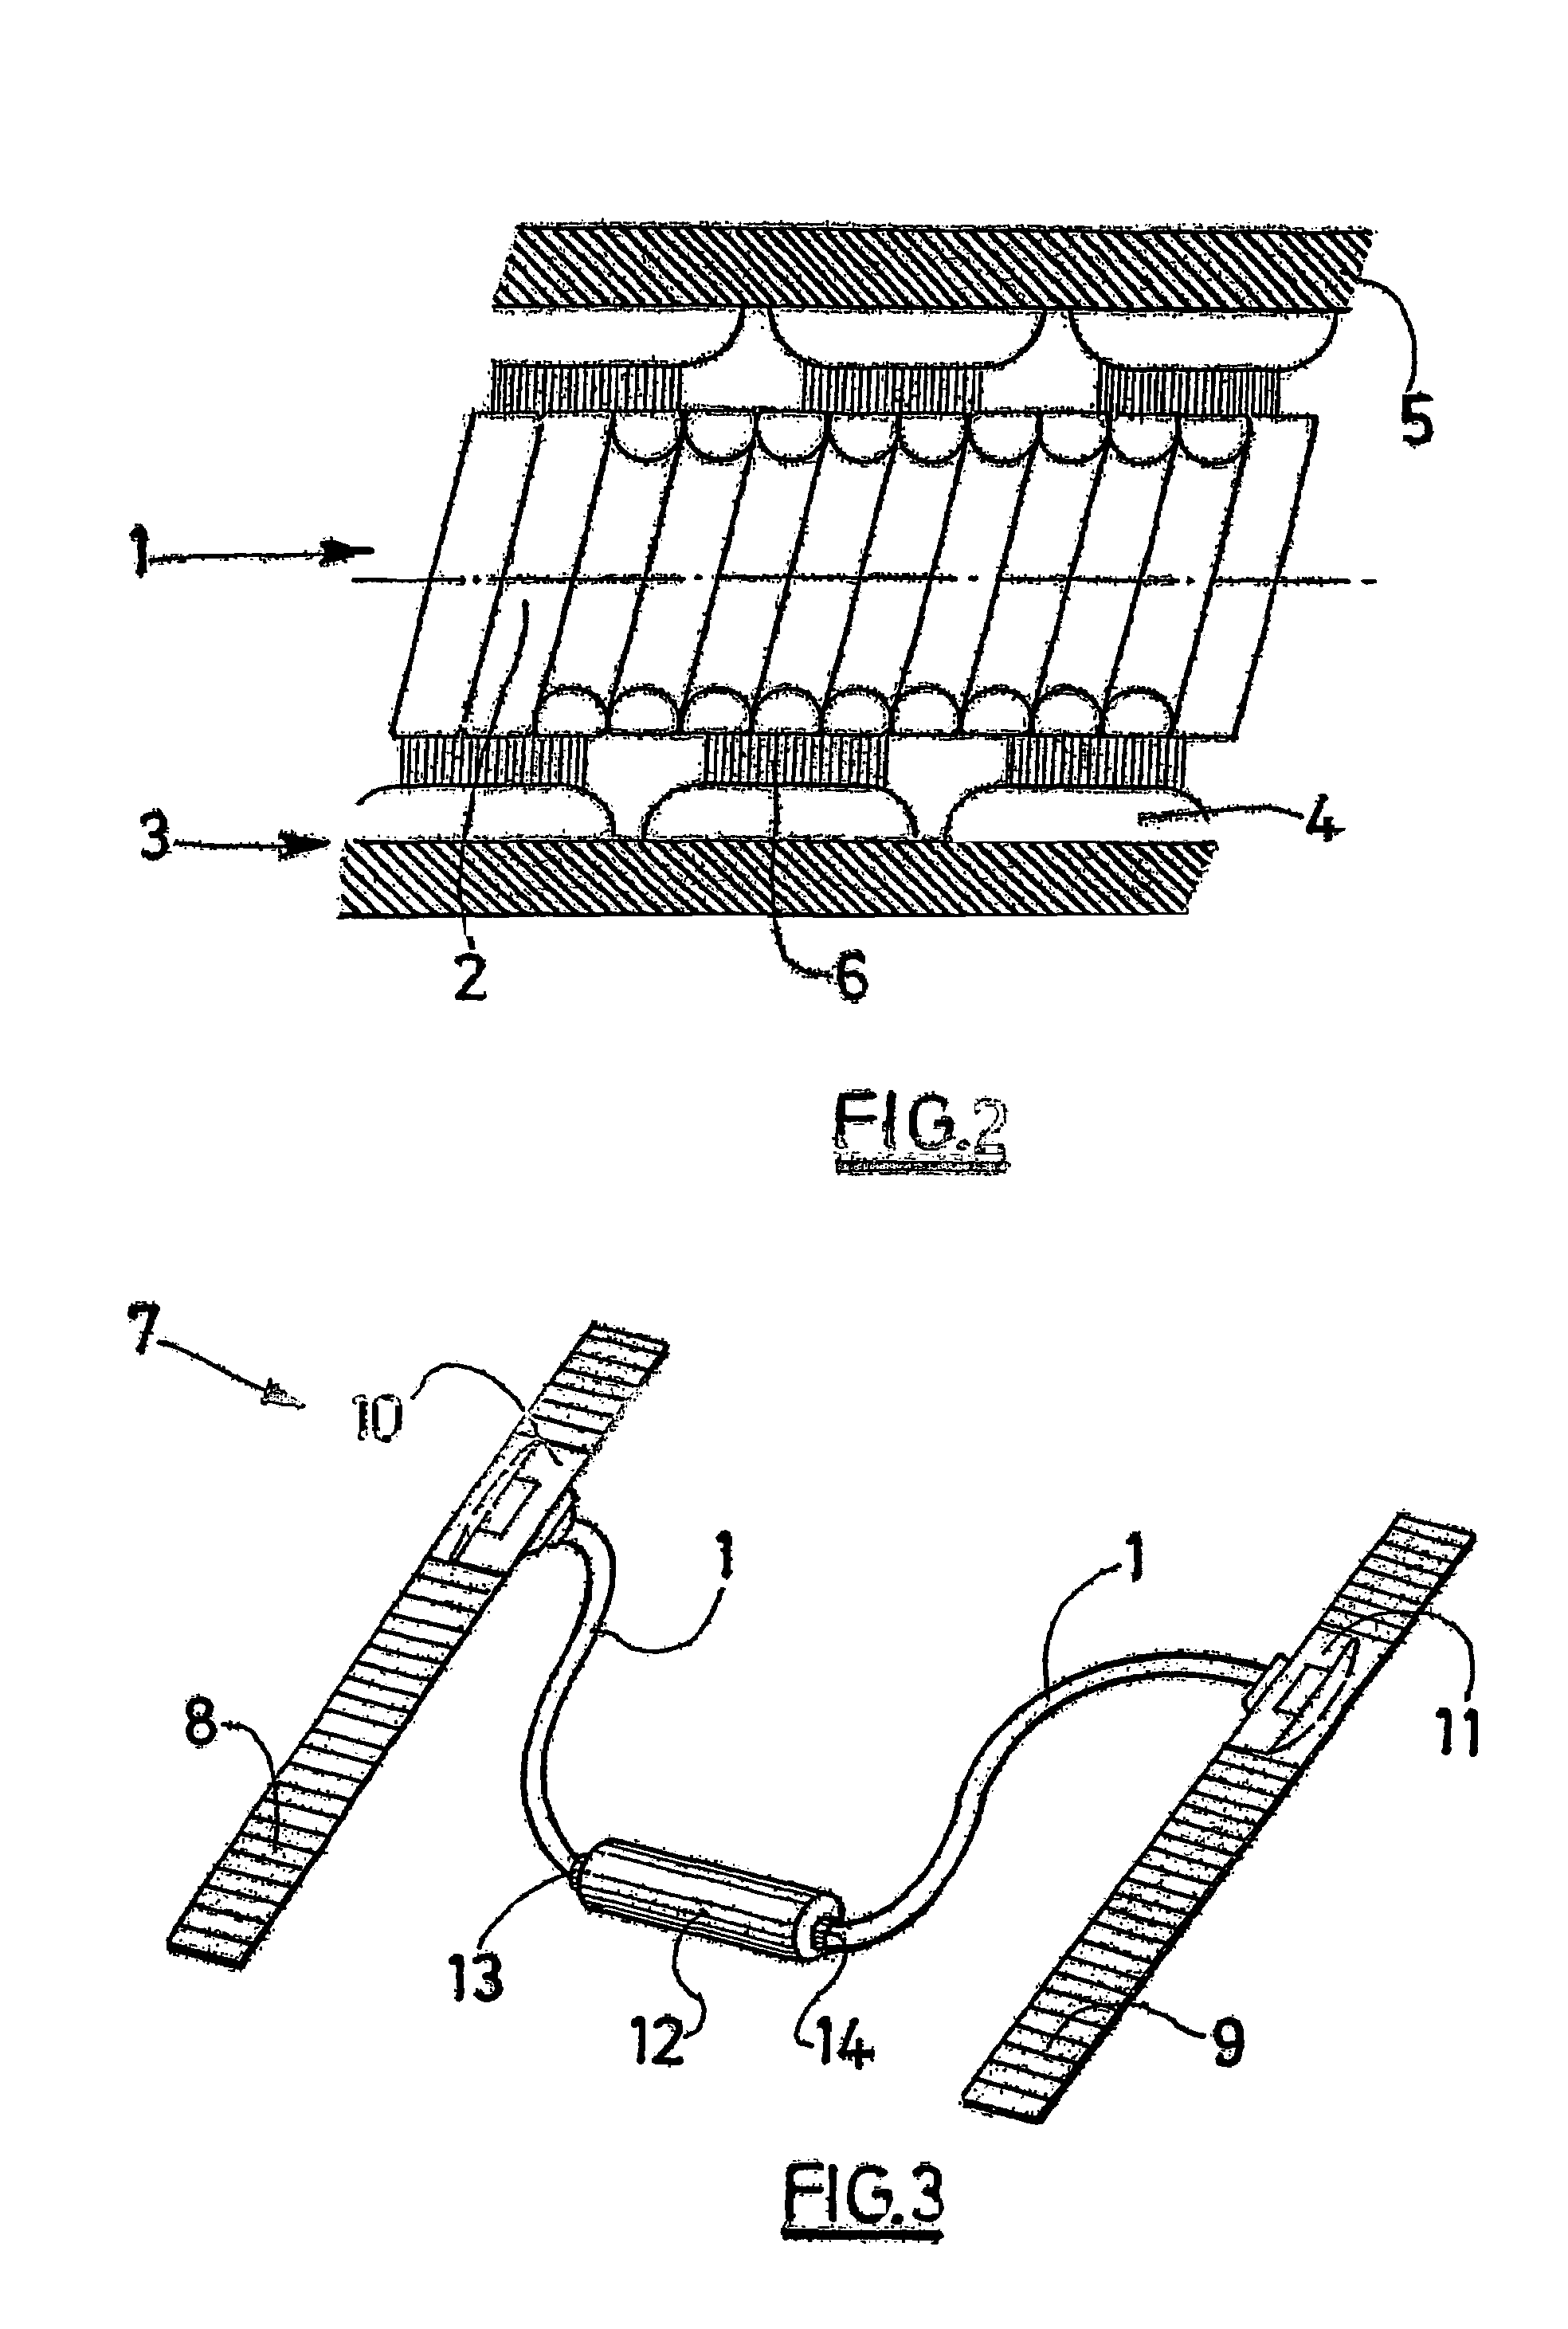 Device for transmitting a rotational movement by means of a smooth shaft